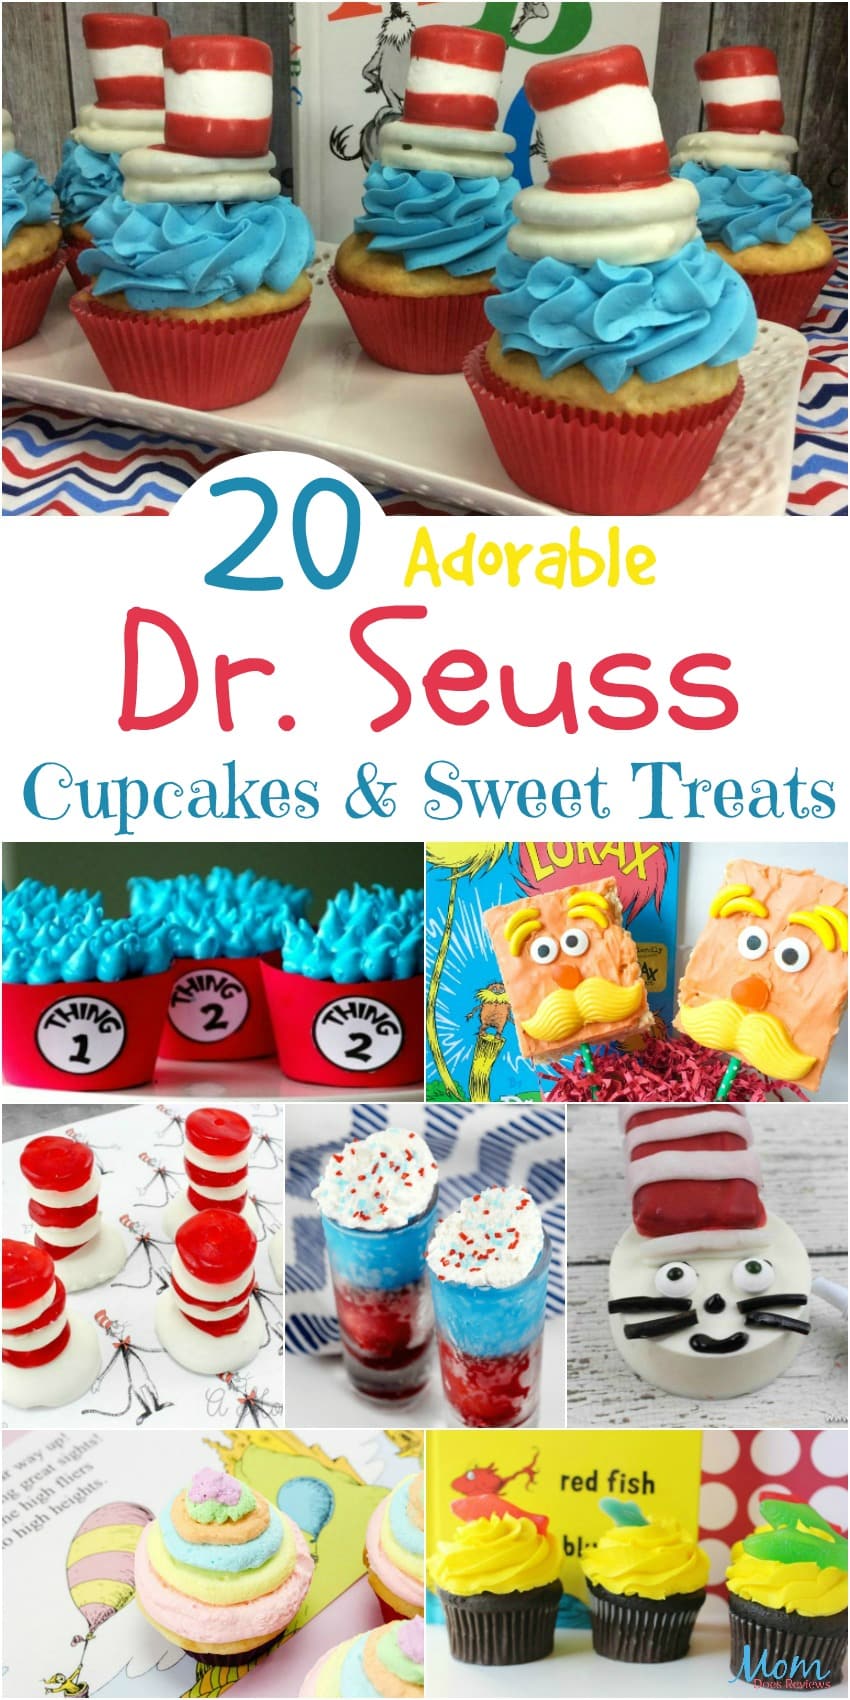 20 Adorable Dr. Seuss Cupcakes, Sweet Treats, and More #sweets #cupcakes #cookies #desserts #drseuss #treats #recipes